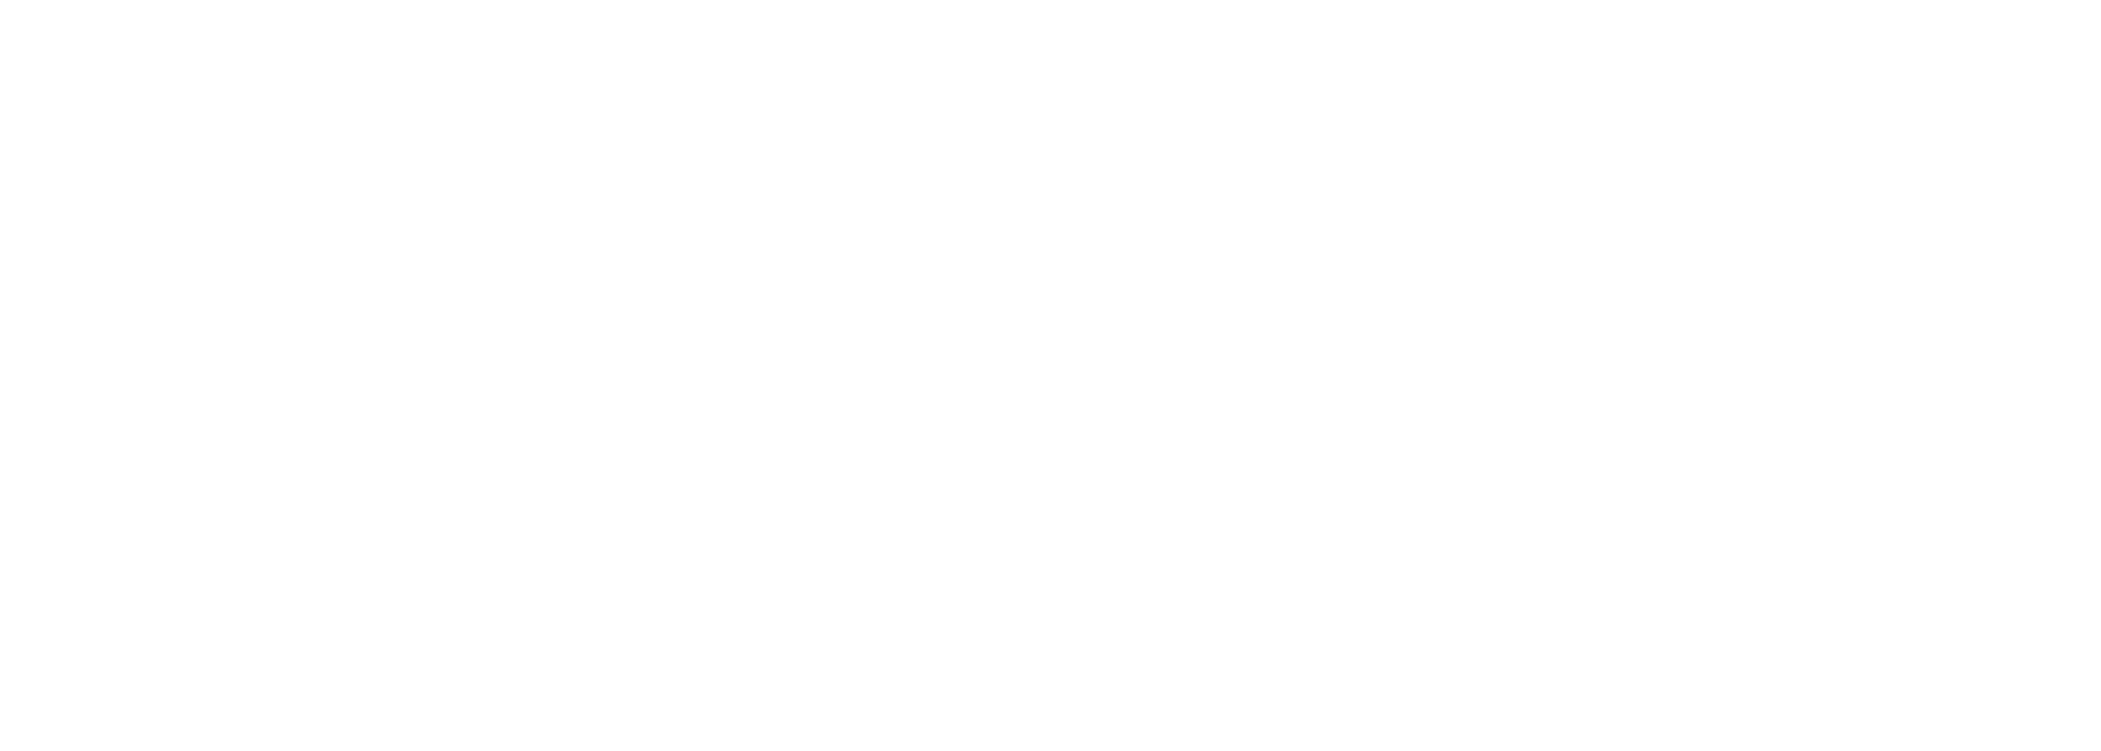 Billy Weathers Homes | Main Logo for Realtor | Nicole Victory Design